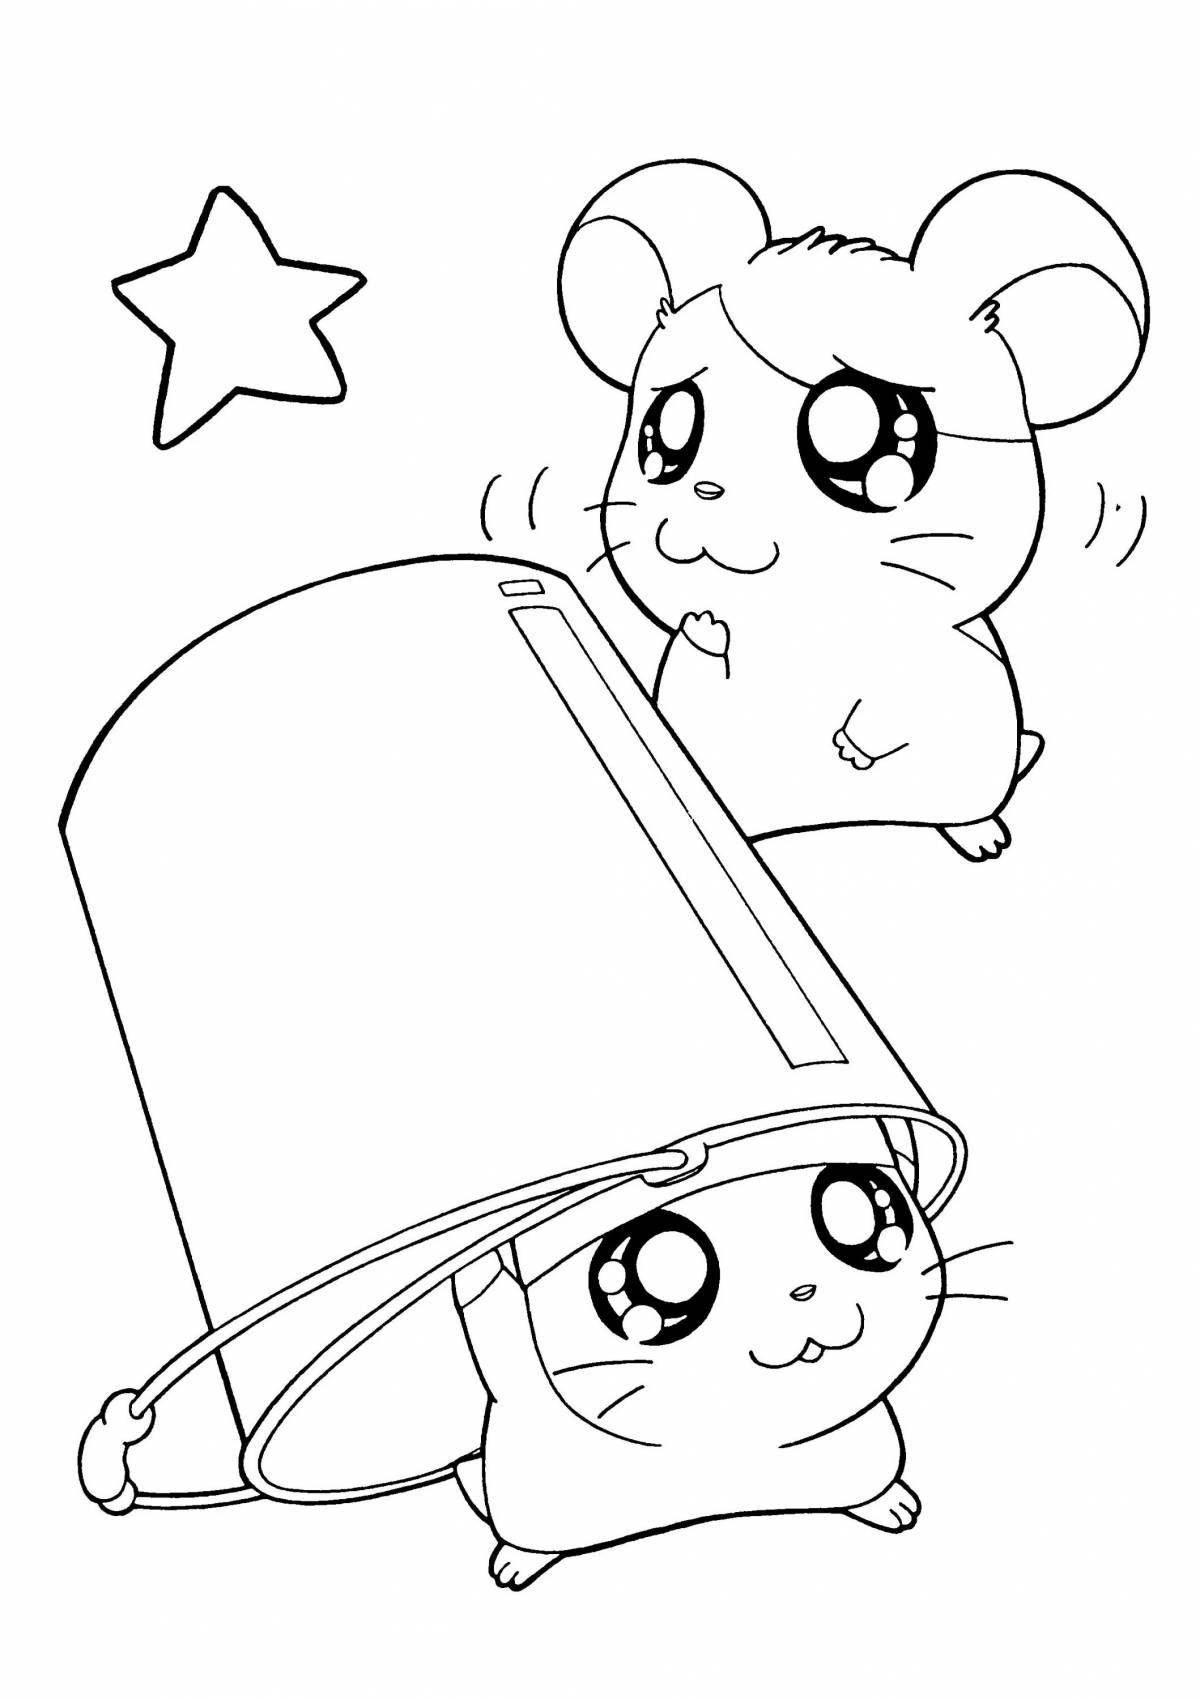 Charming mouse coloring book